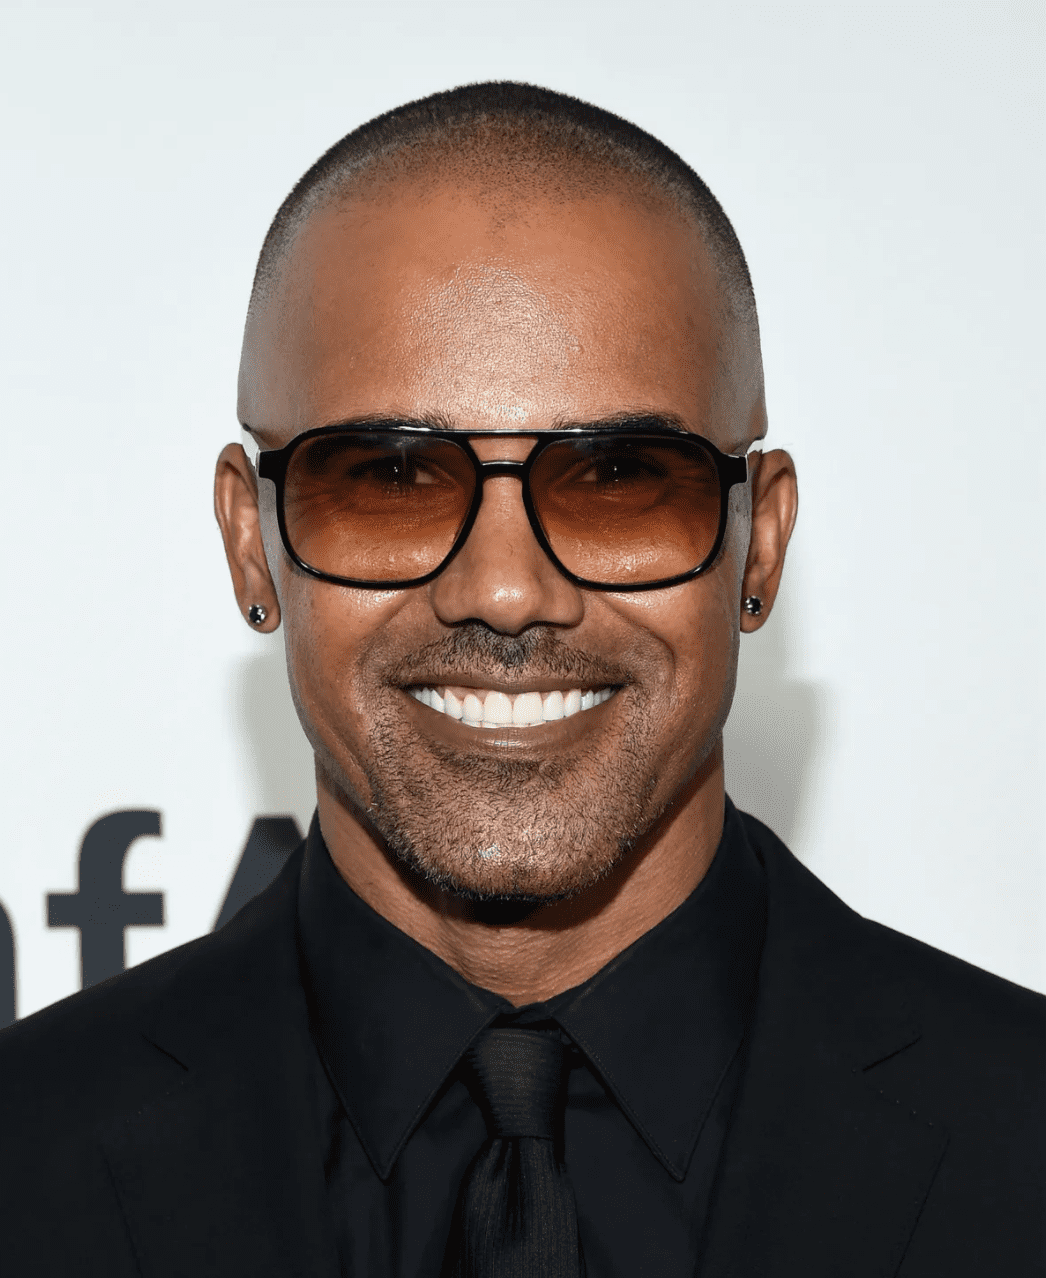 Shemar Moore pictured at amfAR's Inspiration Gala Los Angeles, 2016, California. | Source: Shutterstock